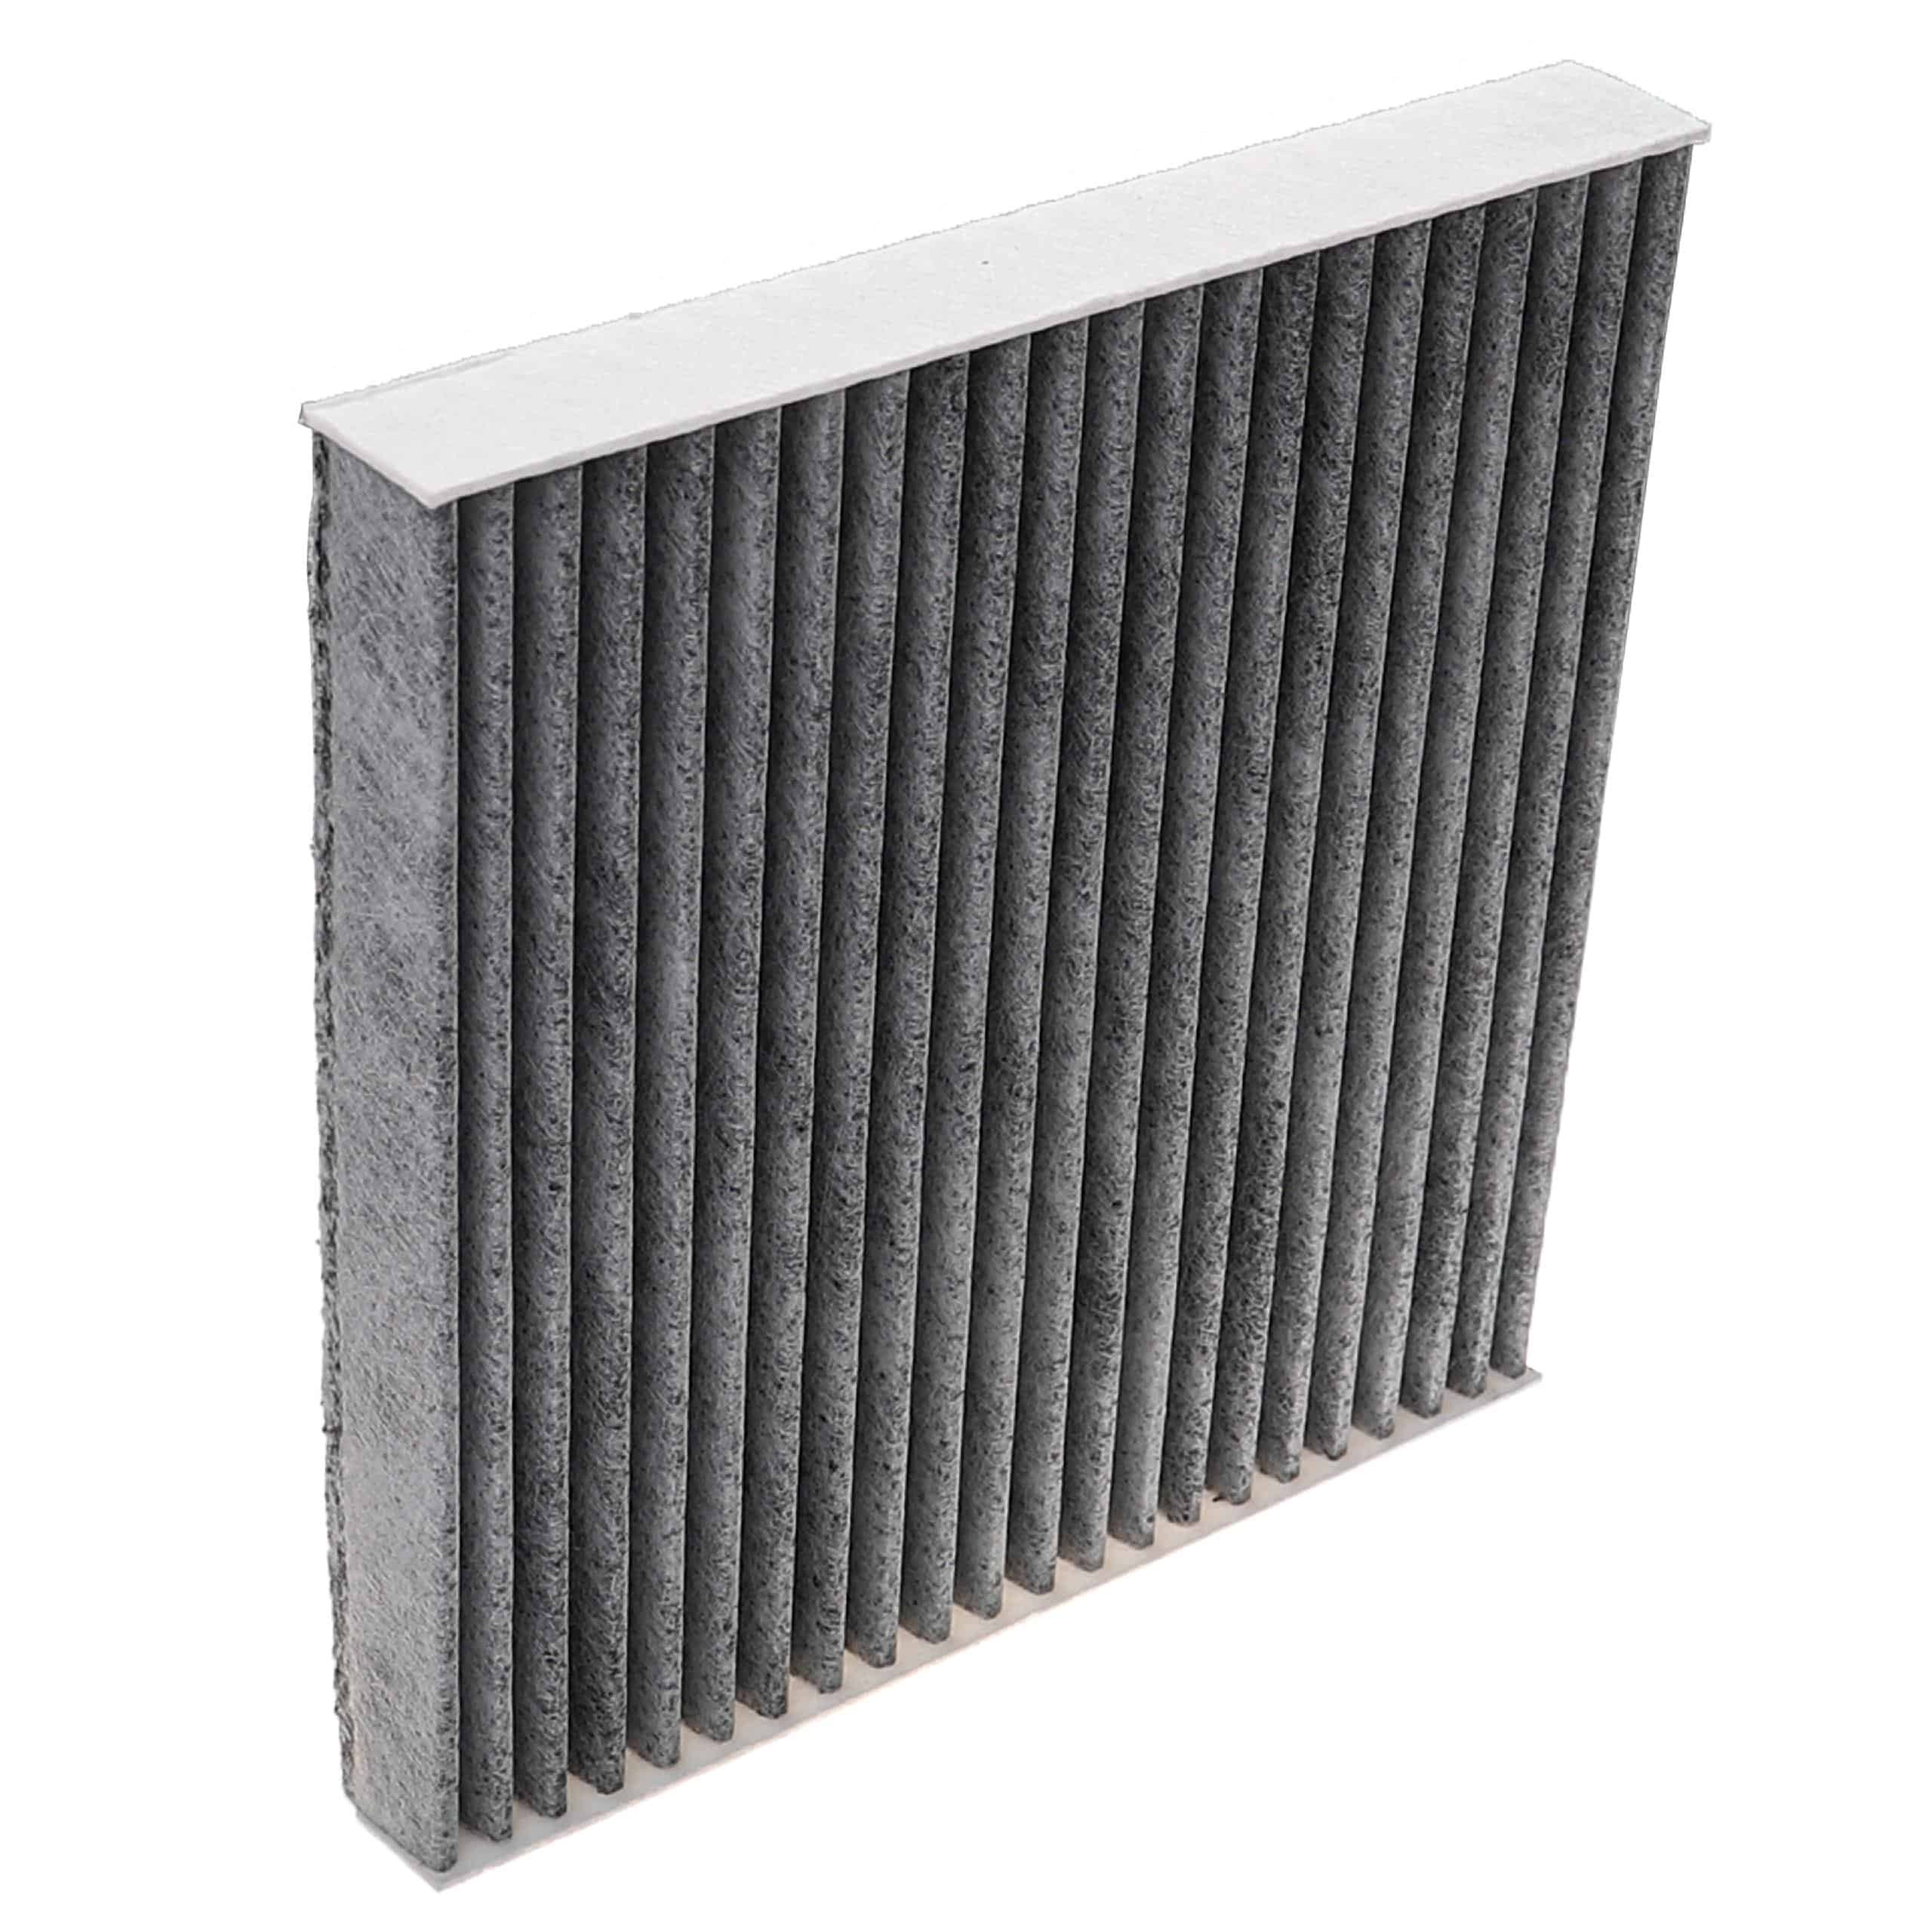 2x Cabin Air Filter replaces Alco Filter MS-6433C etc.